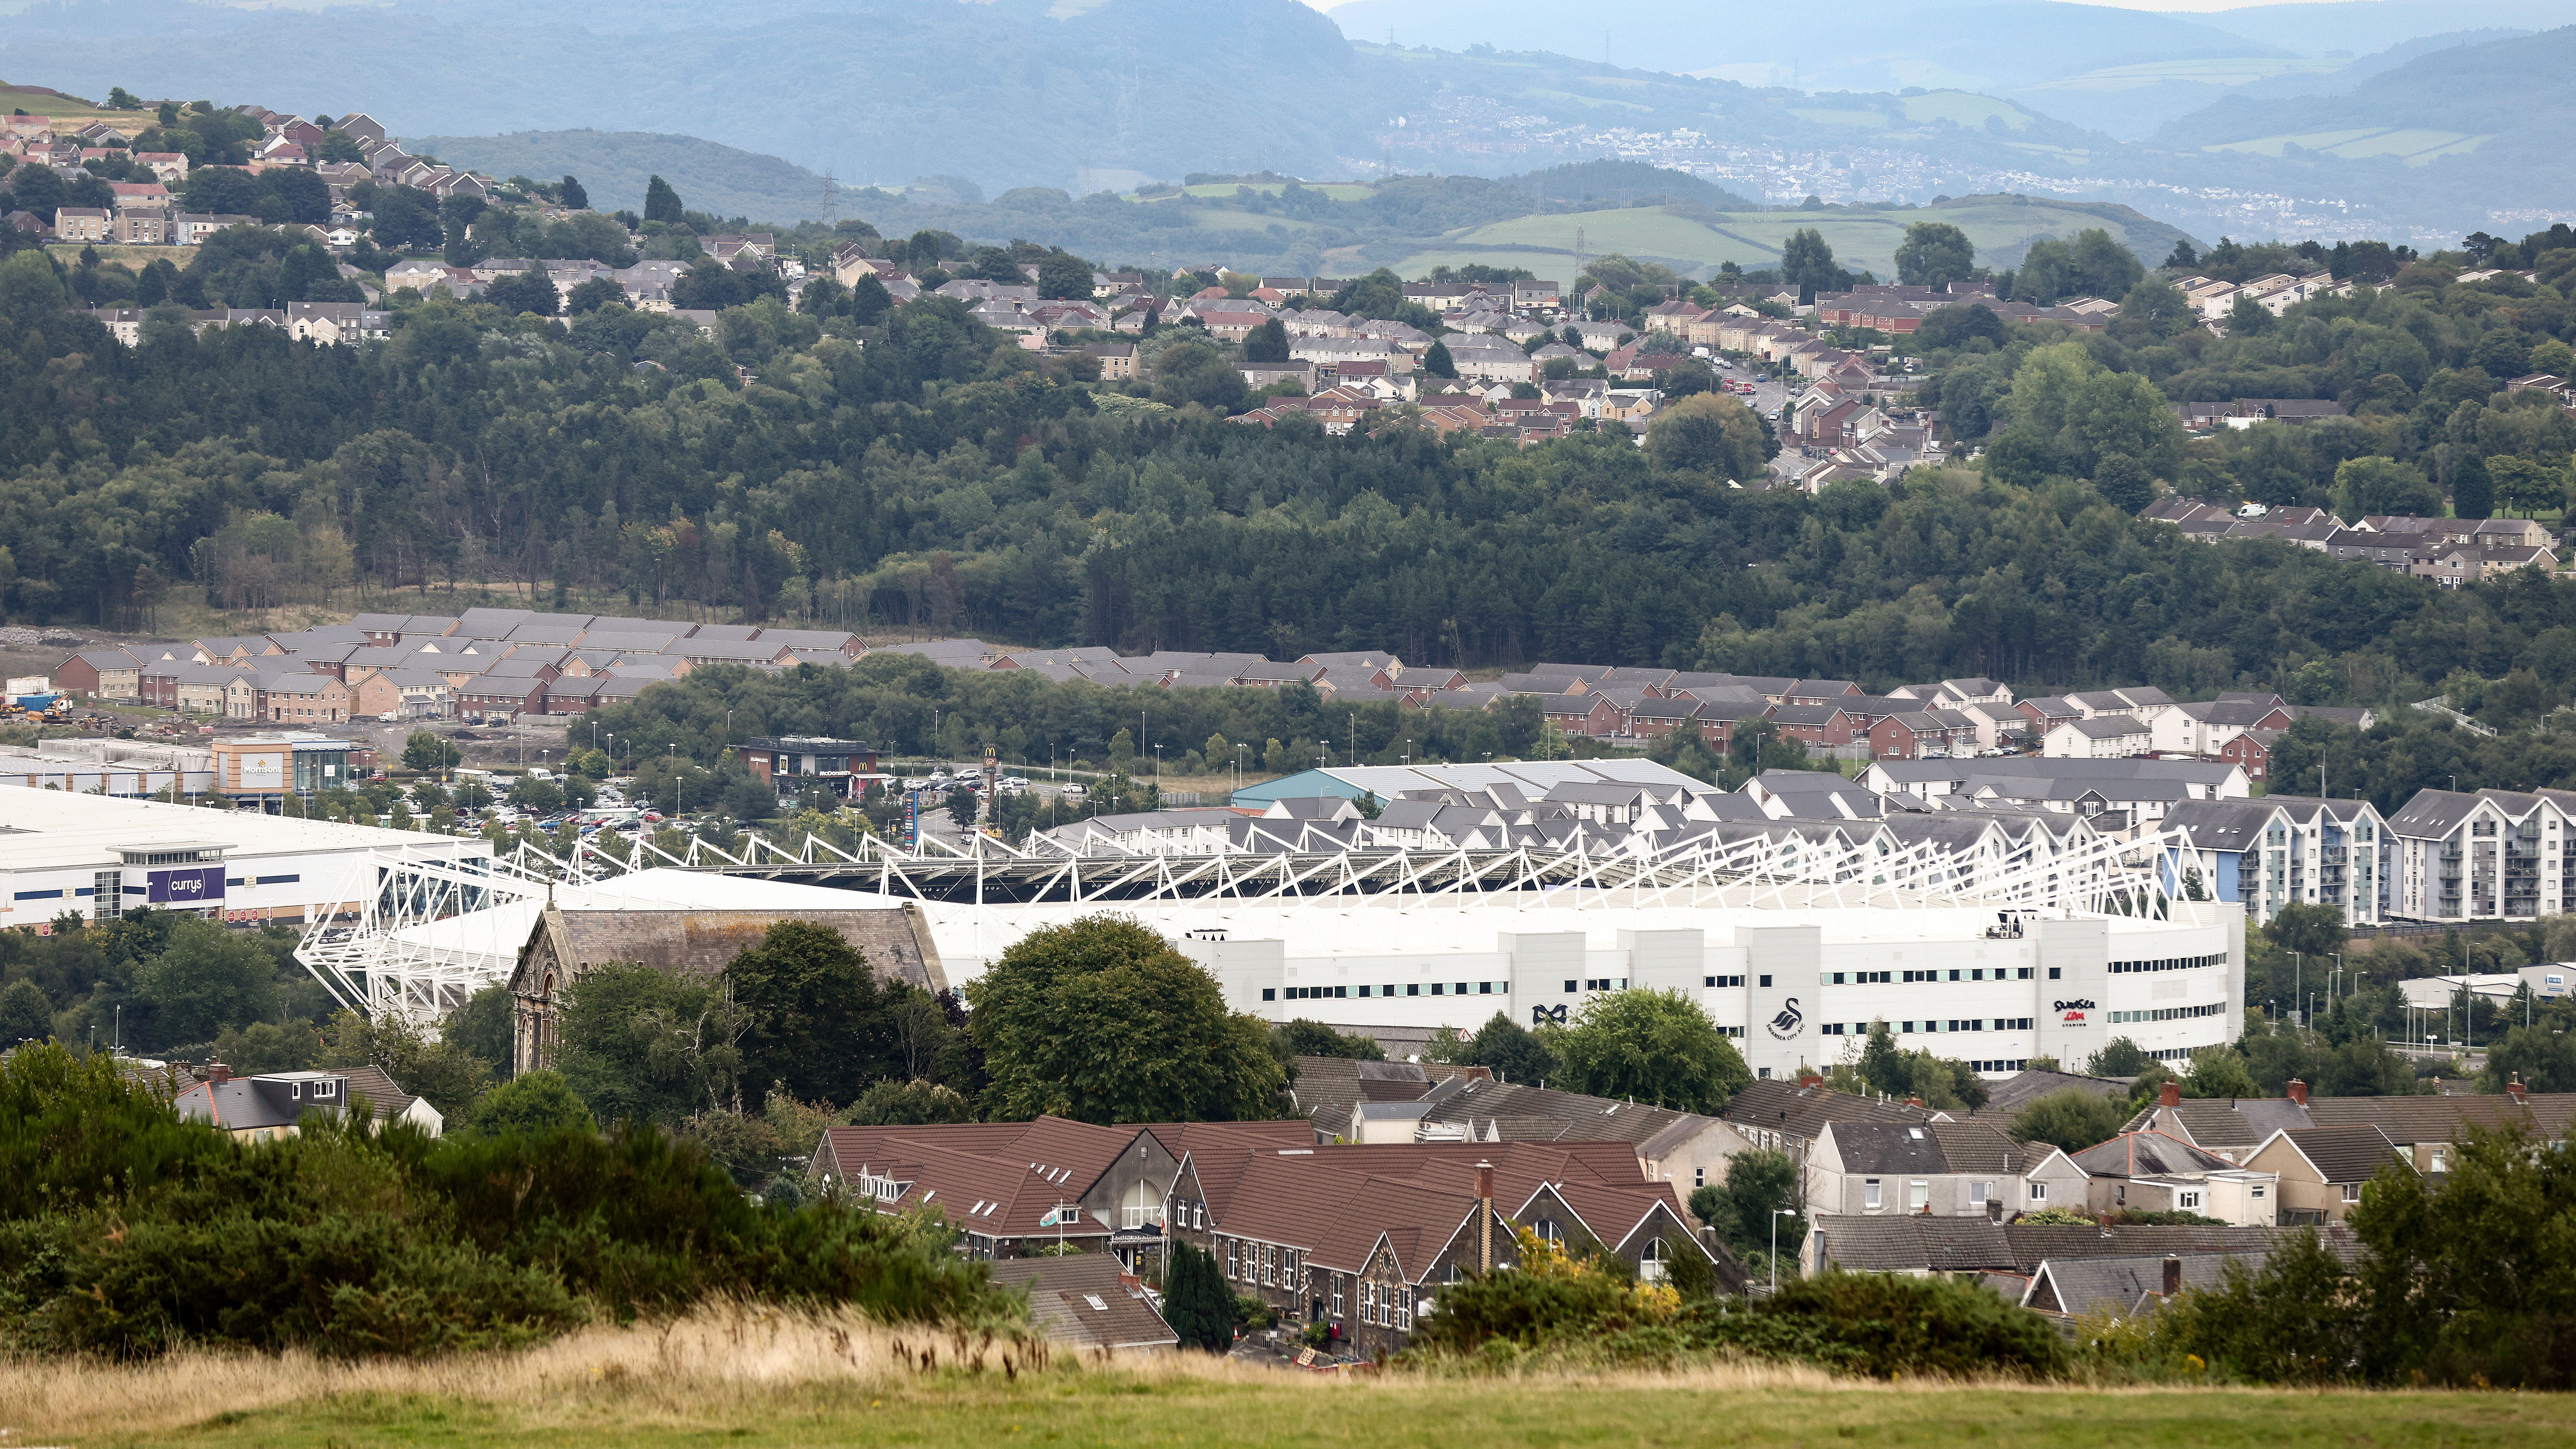 A view of the Swansea.com Stadium from a distance